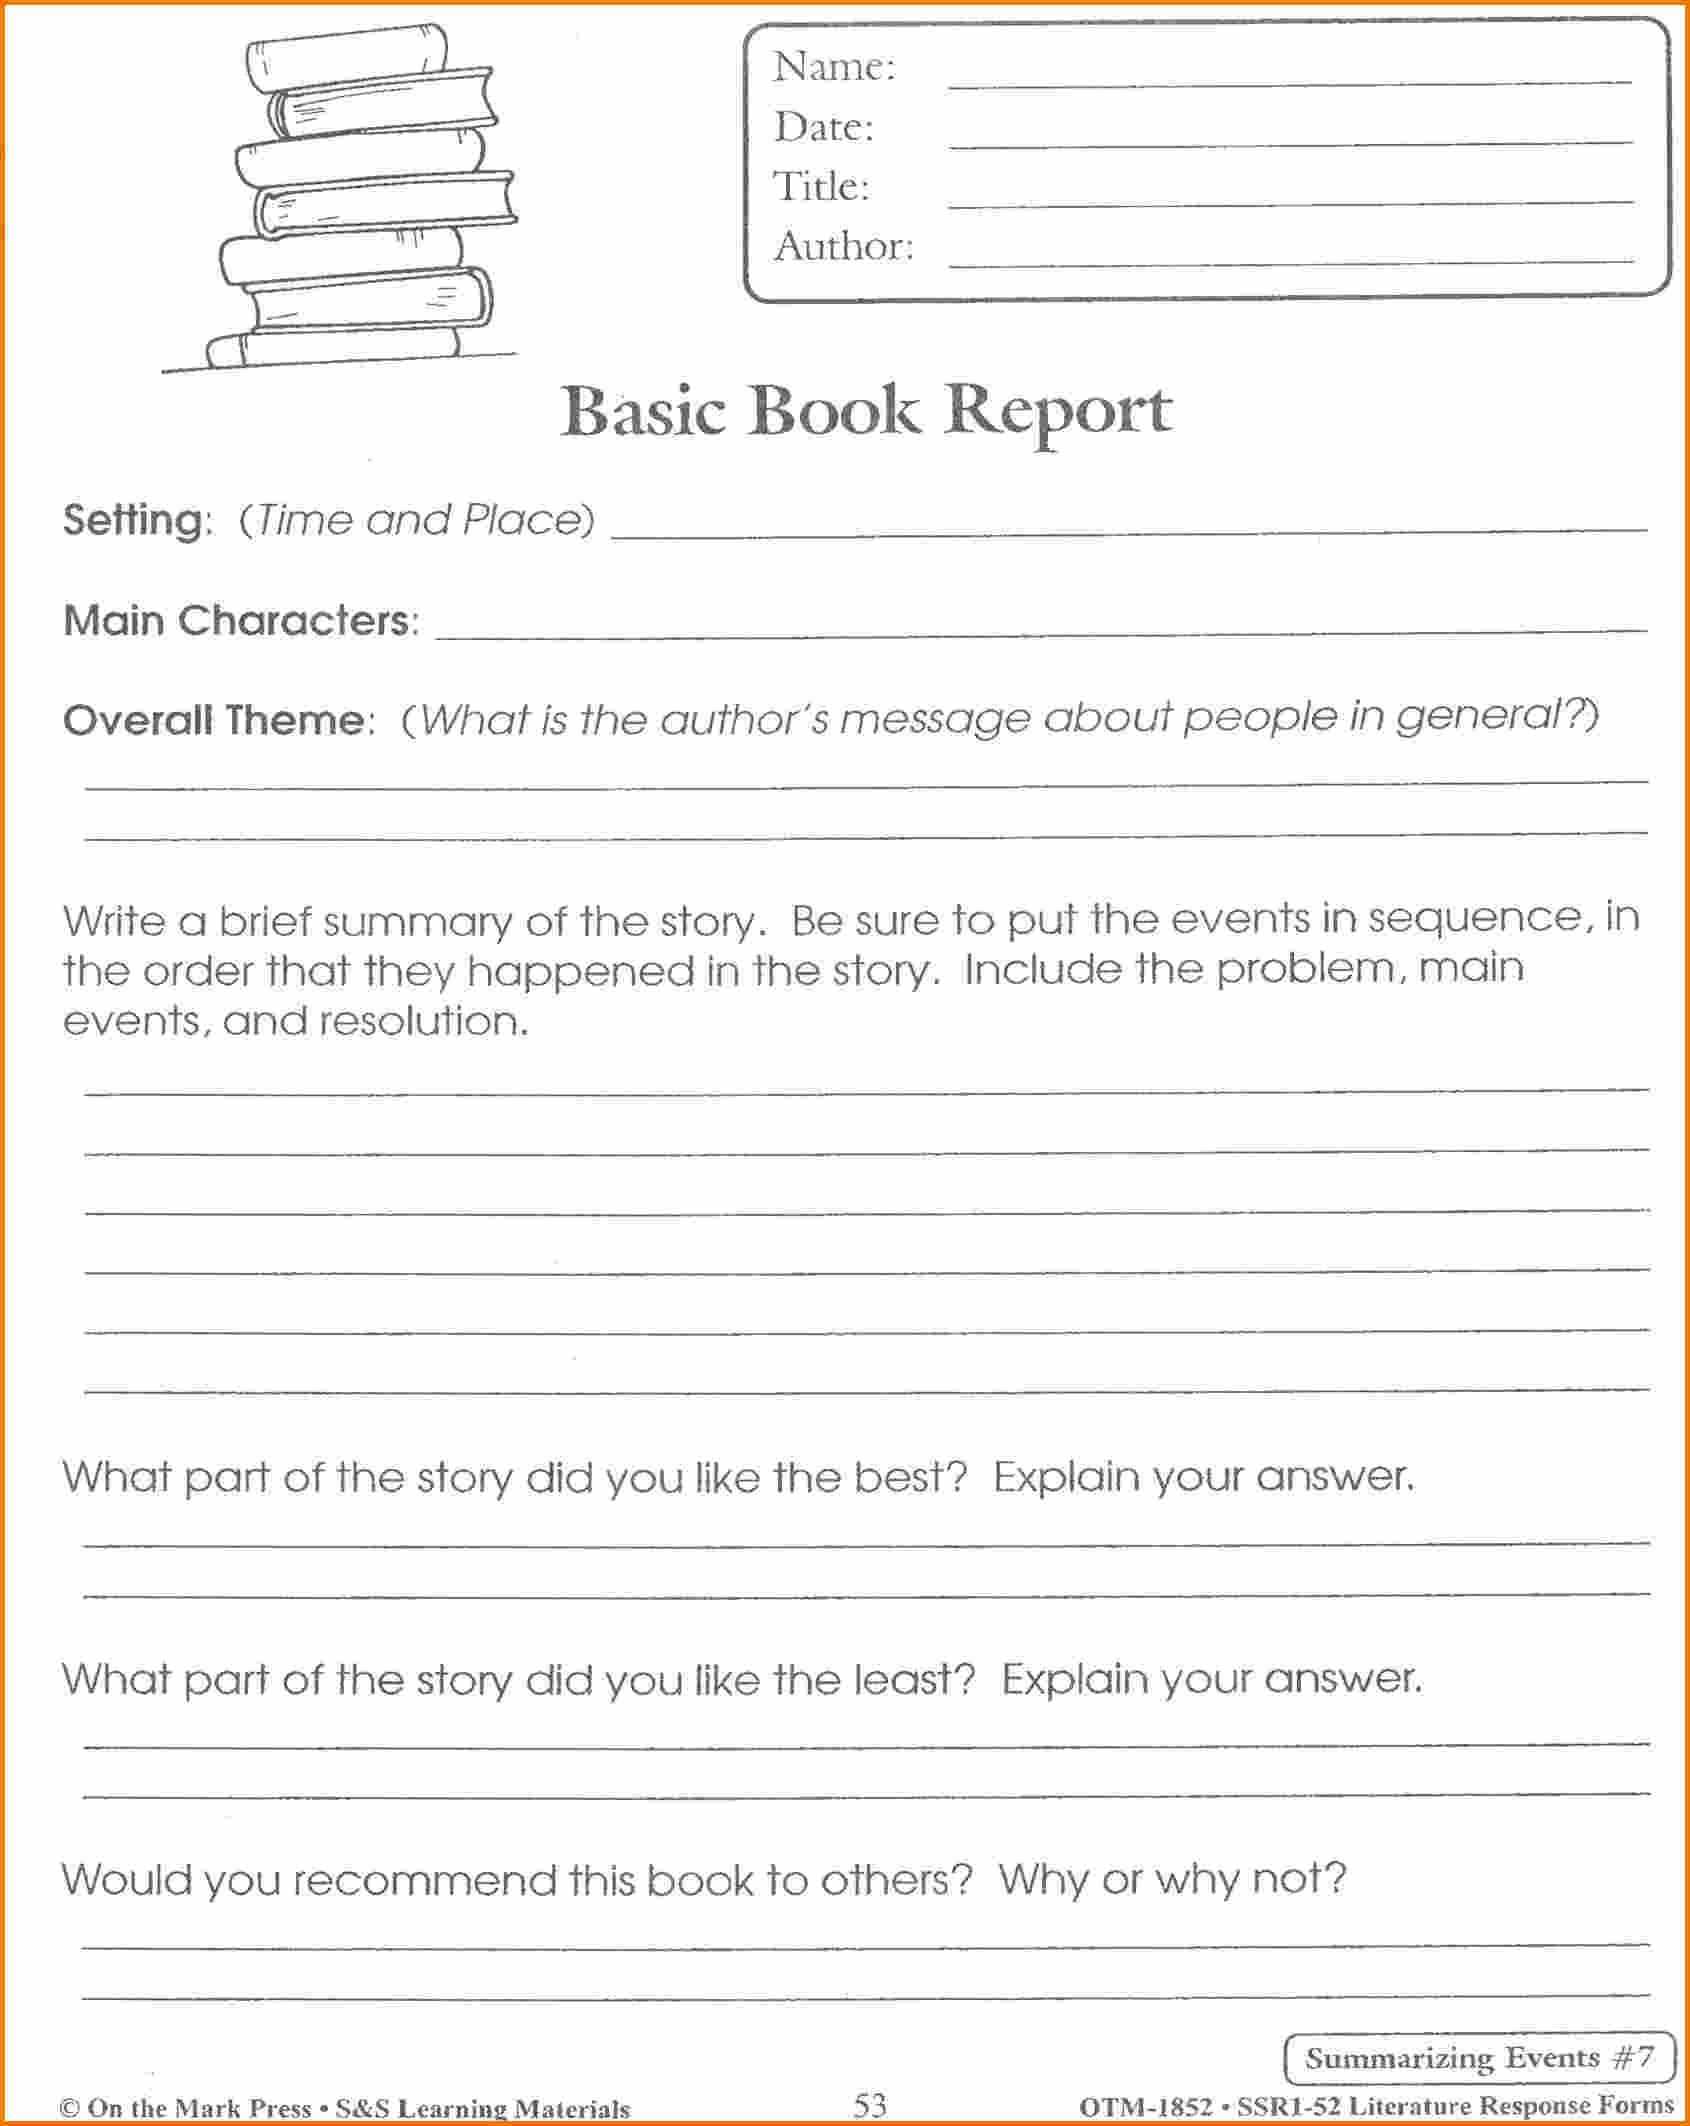 Pinmarcus Tong On Book | Book Report Templates, Book Pertaining To Book Report Template 5Th Grade